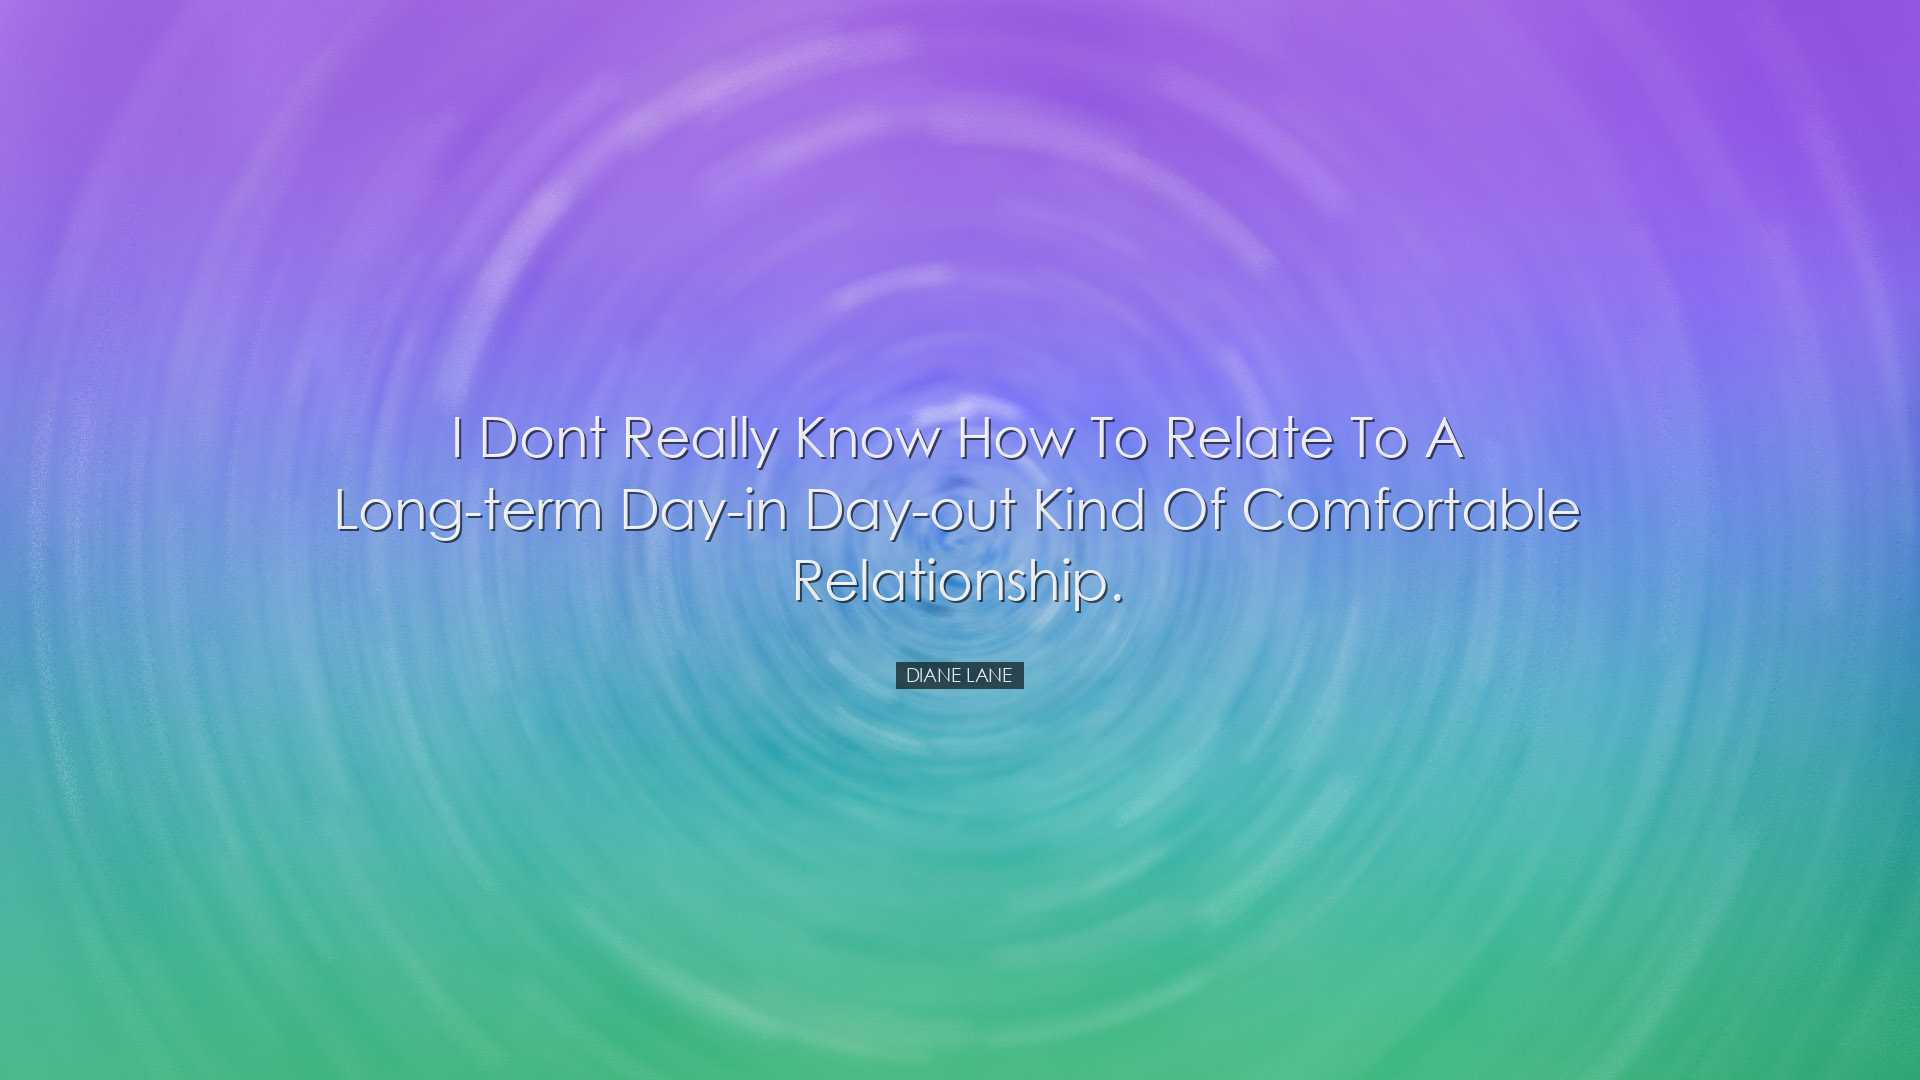 I dont really know how to relate to a long-term day-in day-out kin